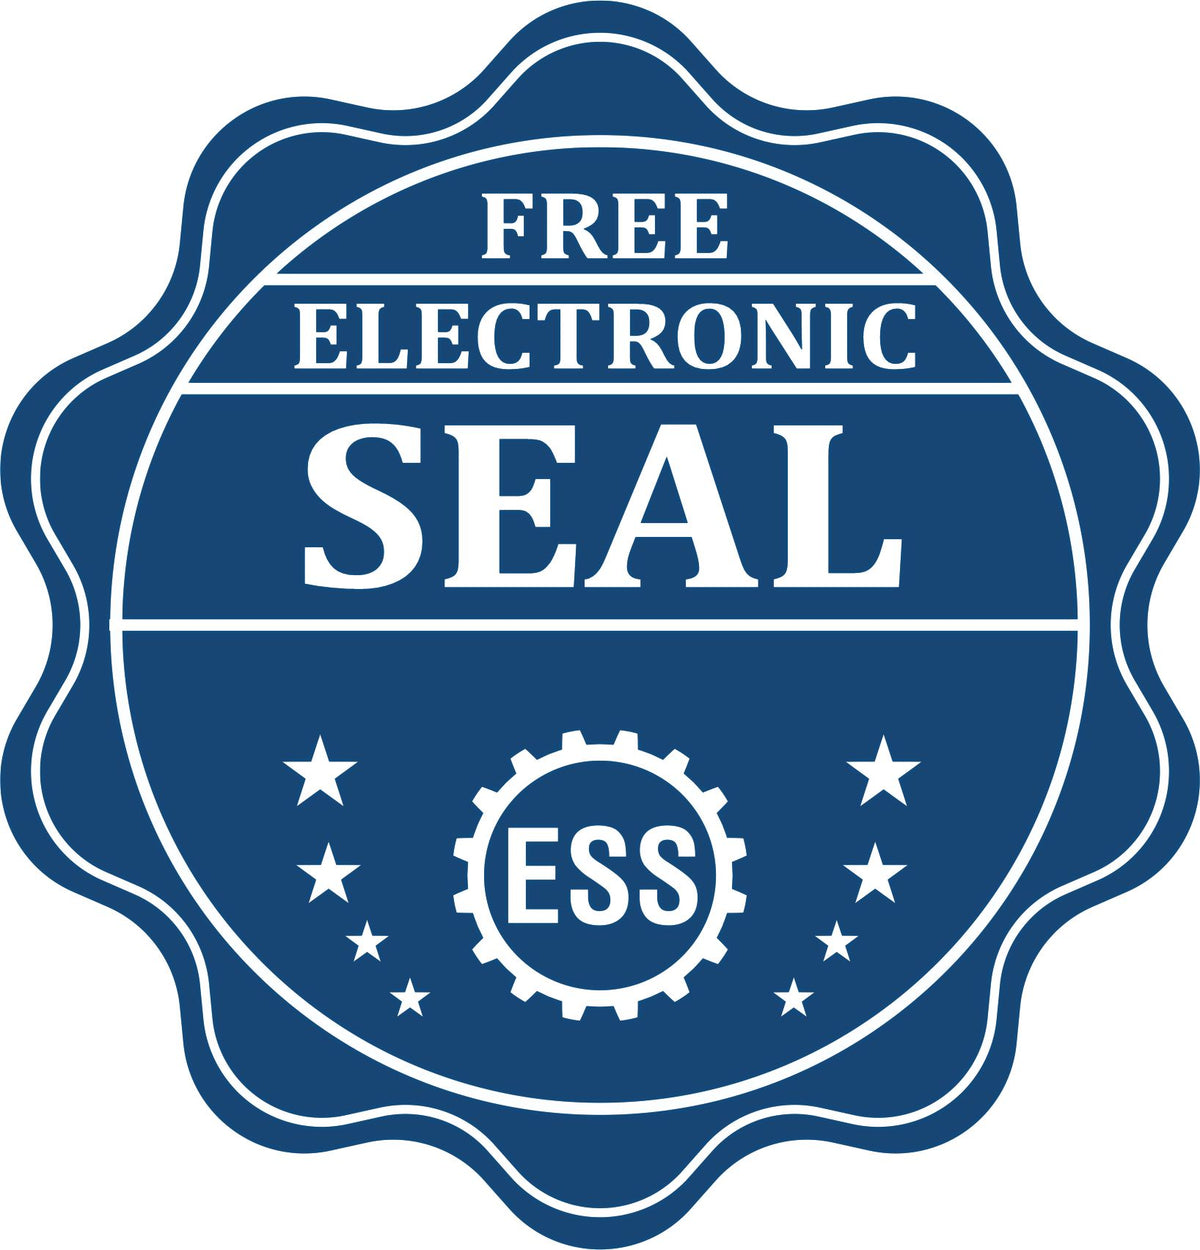 A badge showing a free electronic seal for the Soft Georgia Professional Geologist Seal with stars and the ESS gear on the emblem.